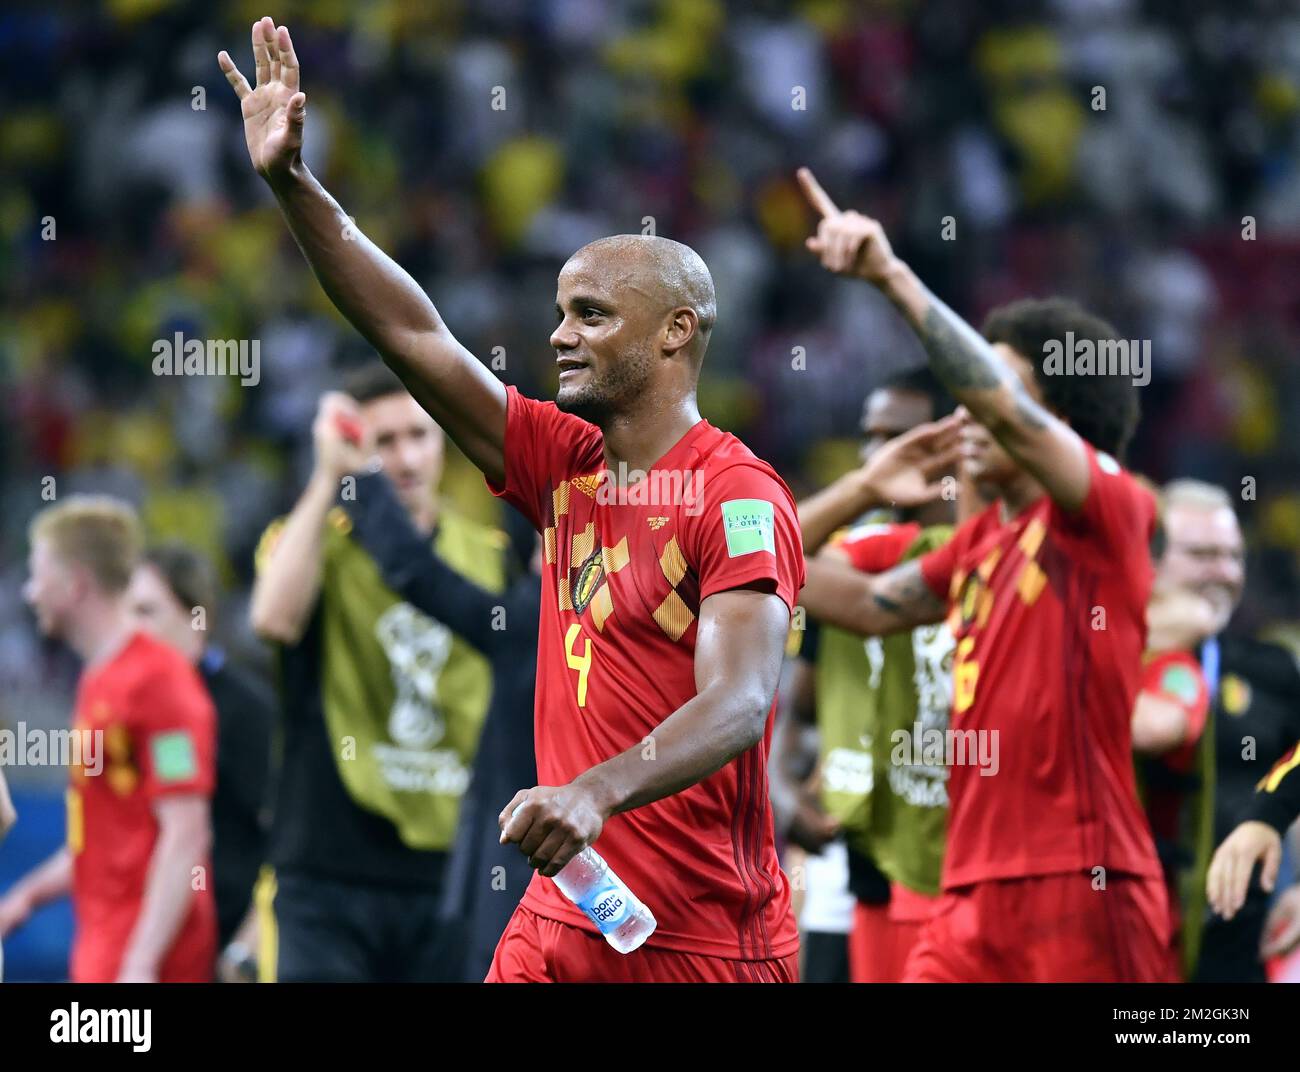 Belgium's Vincent Kompany celebrates after winning a soccer game between Belgian national soccer team the Red Devils and Brazil in Kazan, Russia, Friday 06 July 2018, the quarter-finals of the 2018 FIFA World Cup. BELGA PHOTO DIRK WAEM  Stock Photo